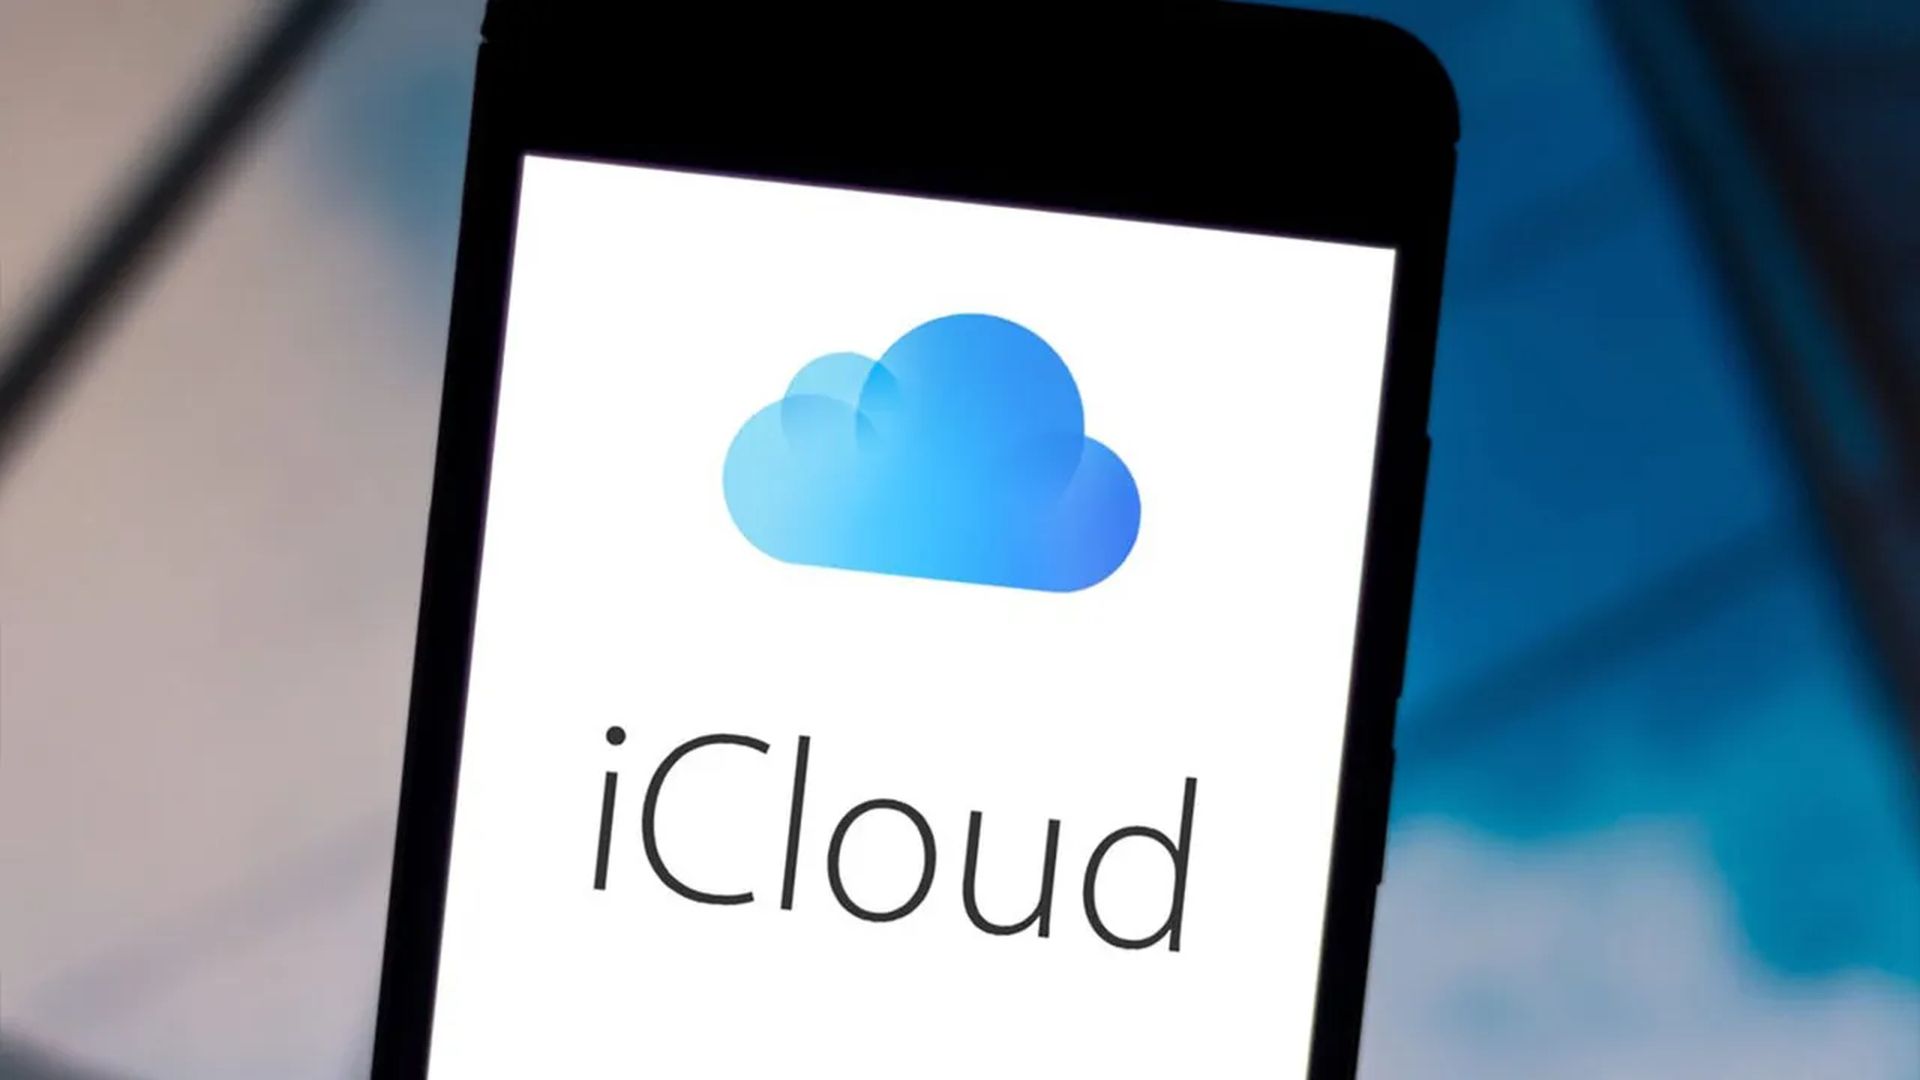 iCloud could not communicate with the server